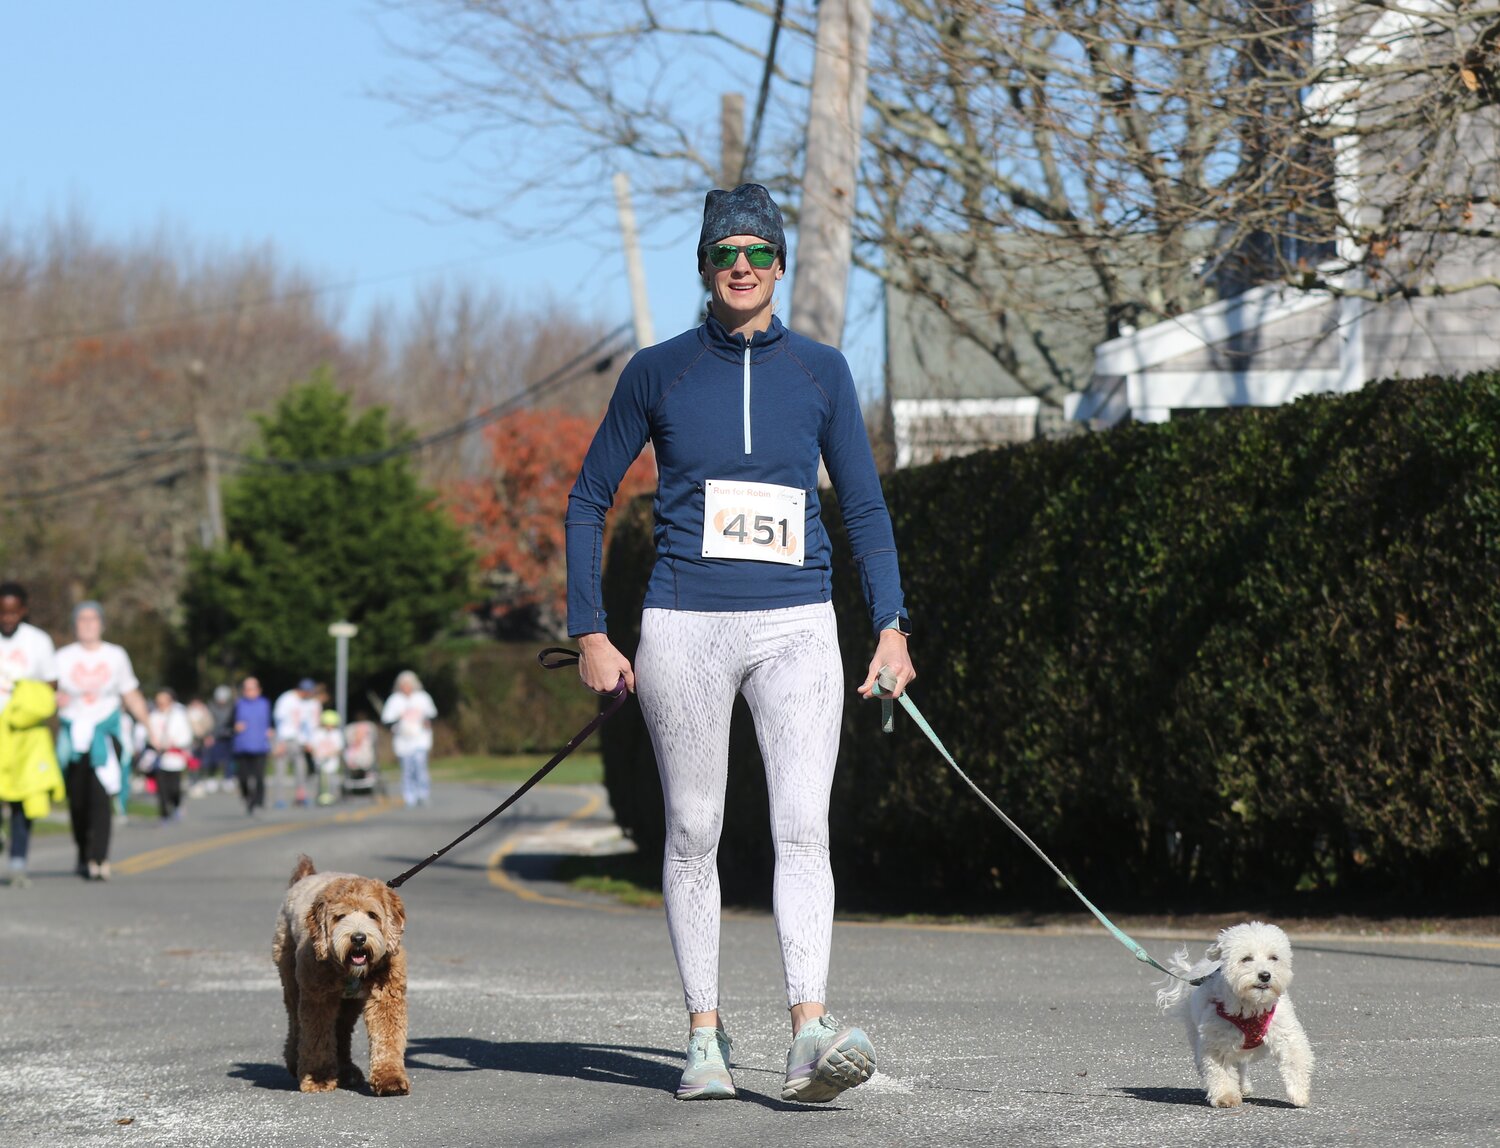 The ninth annual Run for Robin drew over 500 runners and walkers Sunday.